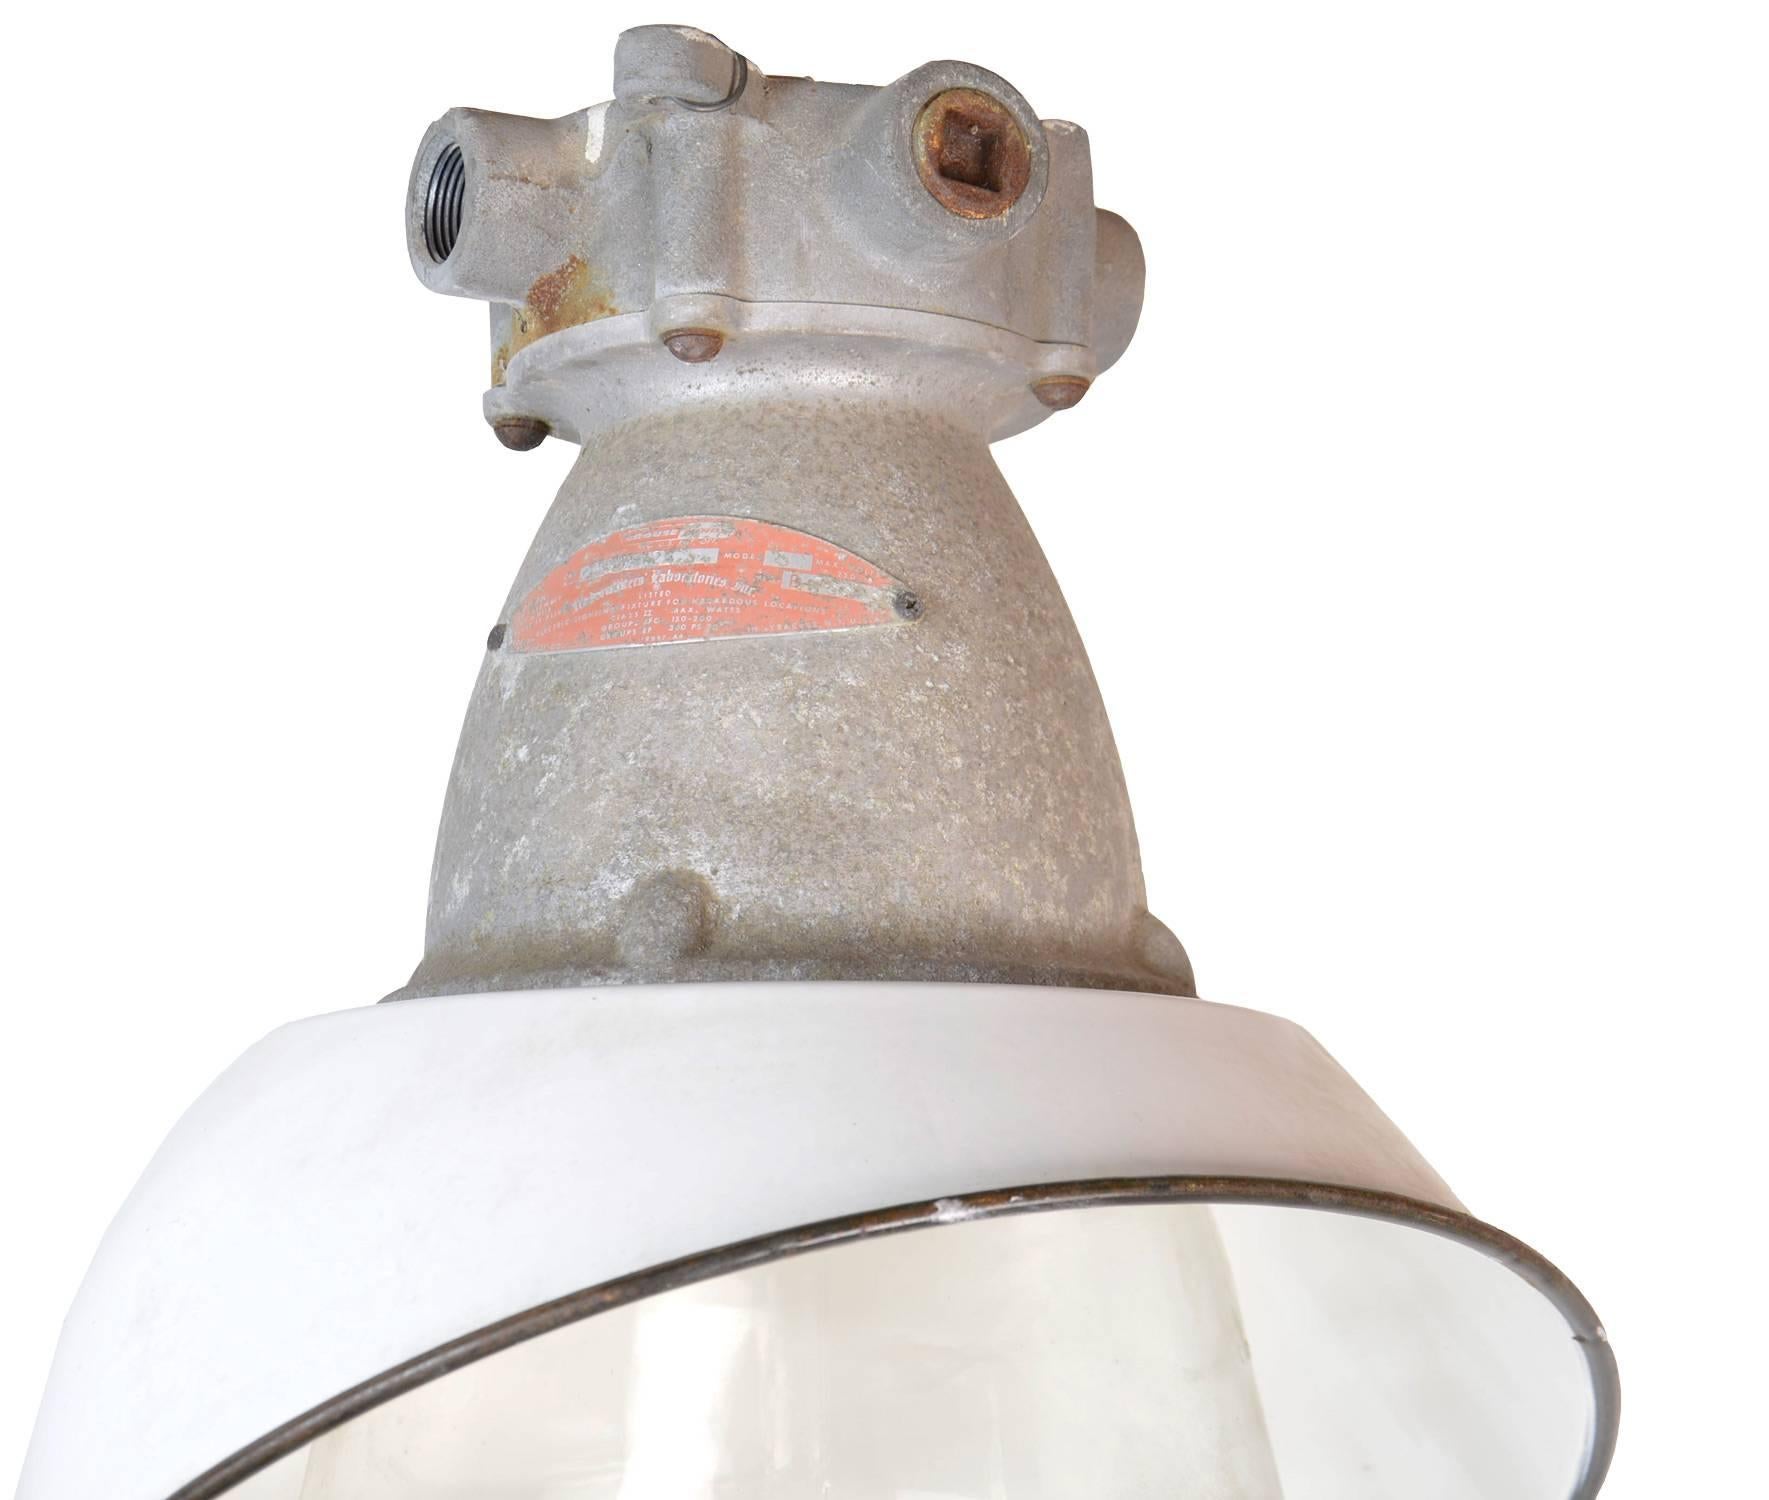 Cast aluminum warehouse "fixture for hazardous locations" with white enameled steel 45 degree angled shade and explosion proof globe by Crouse-Hinds from Syracuse, N.Y.